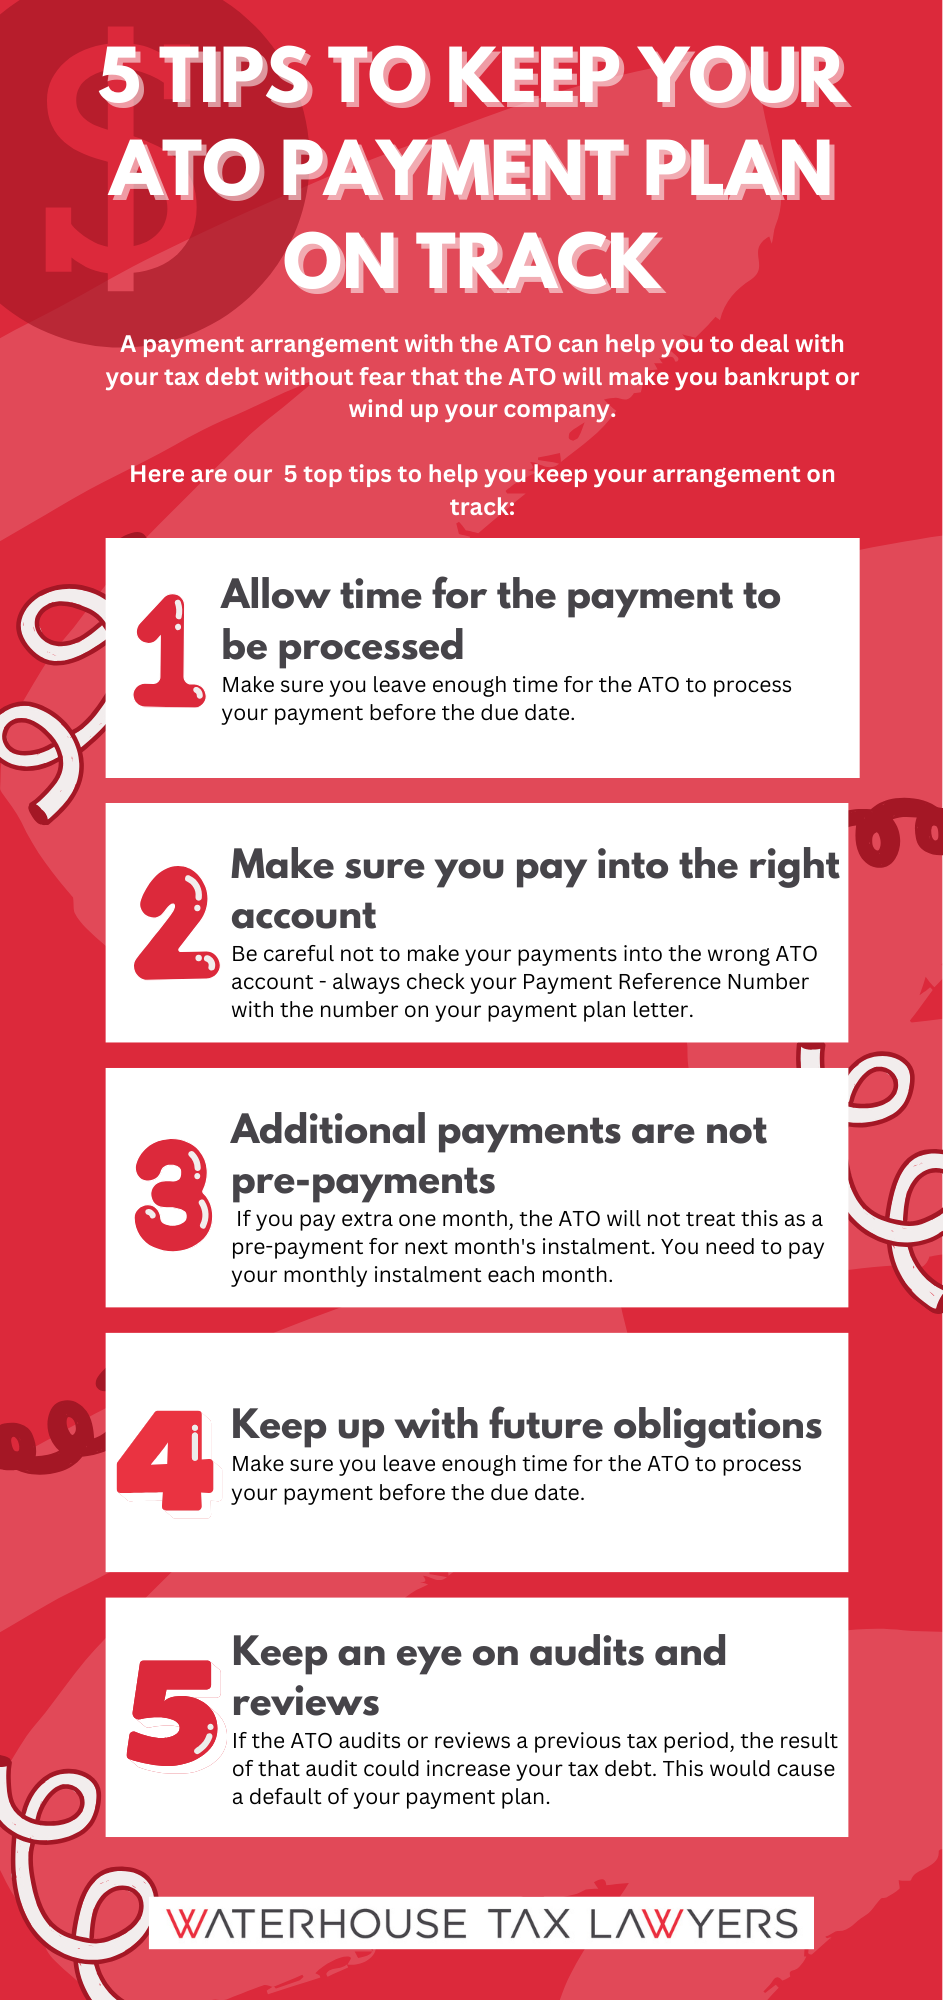 5 tips to keep your ATO payment plan on track